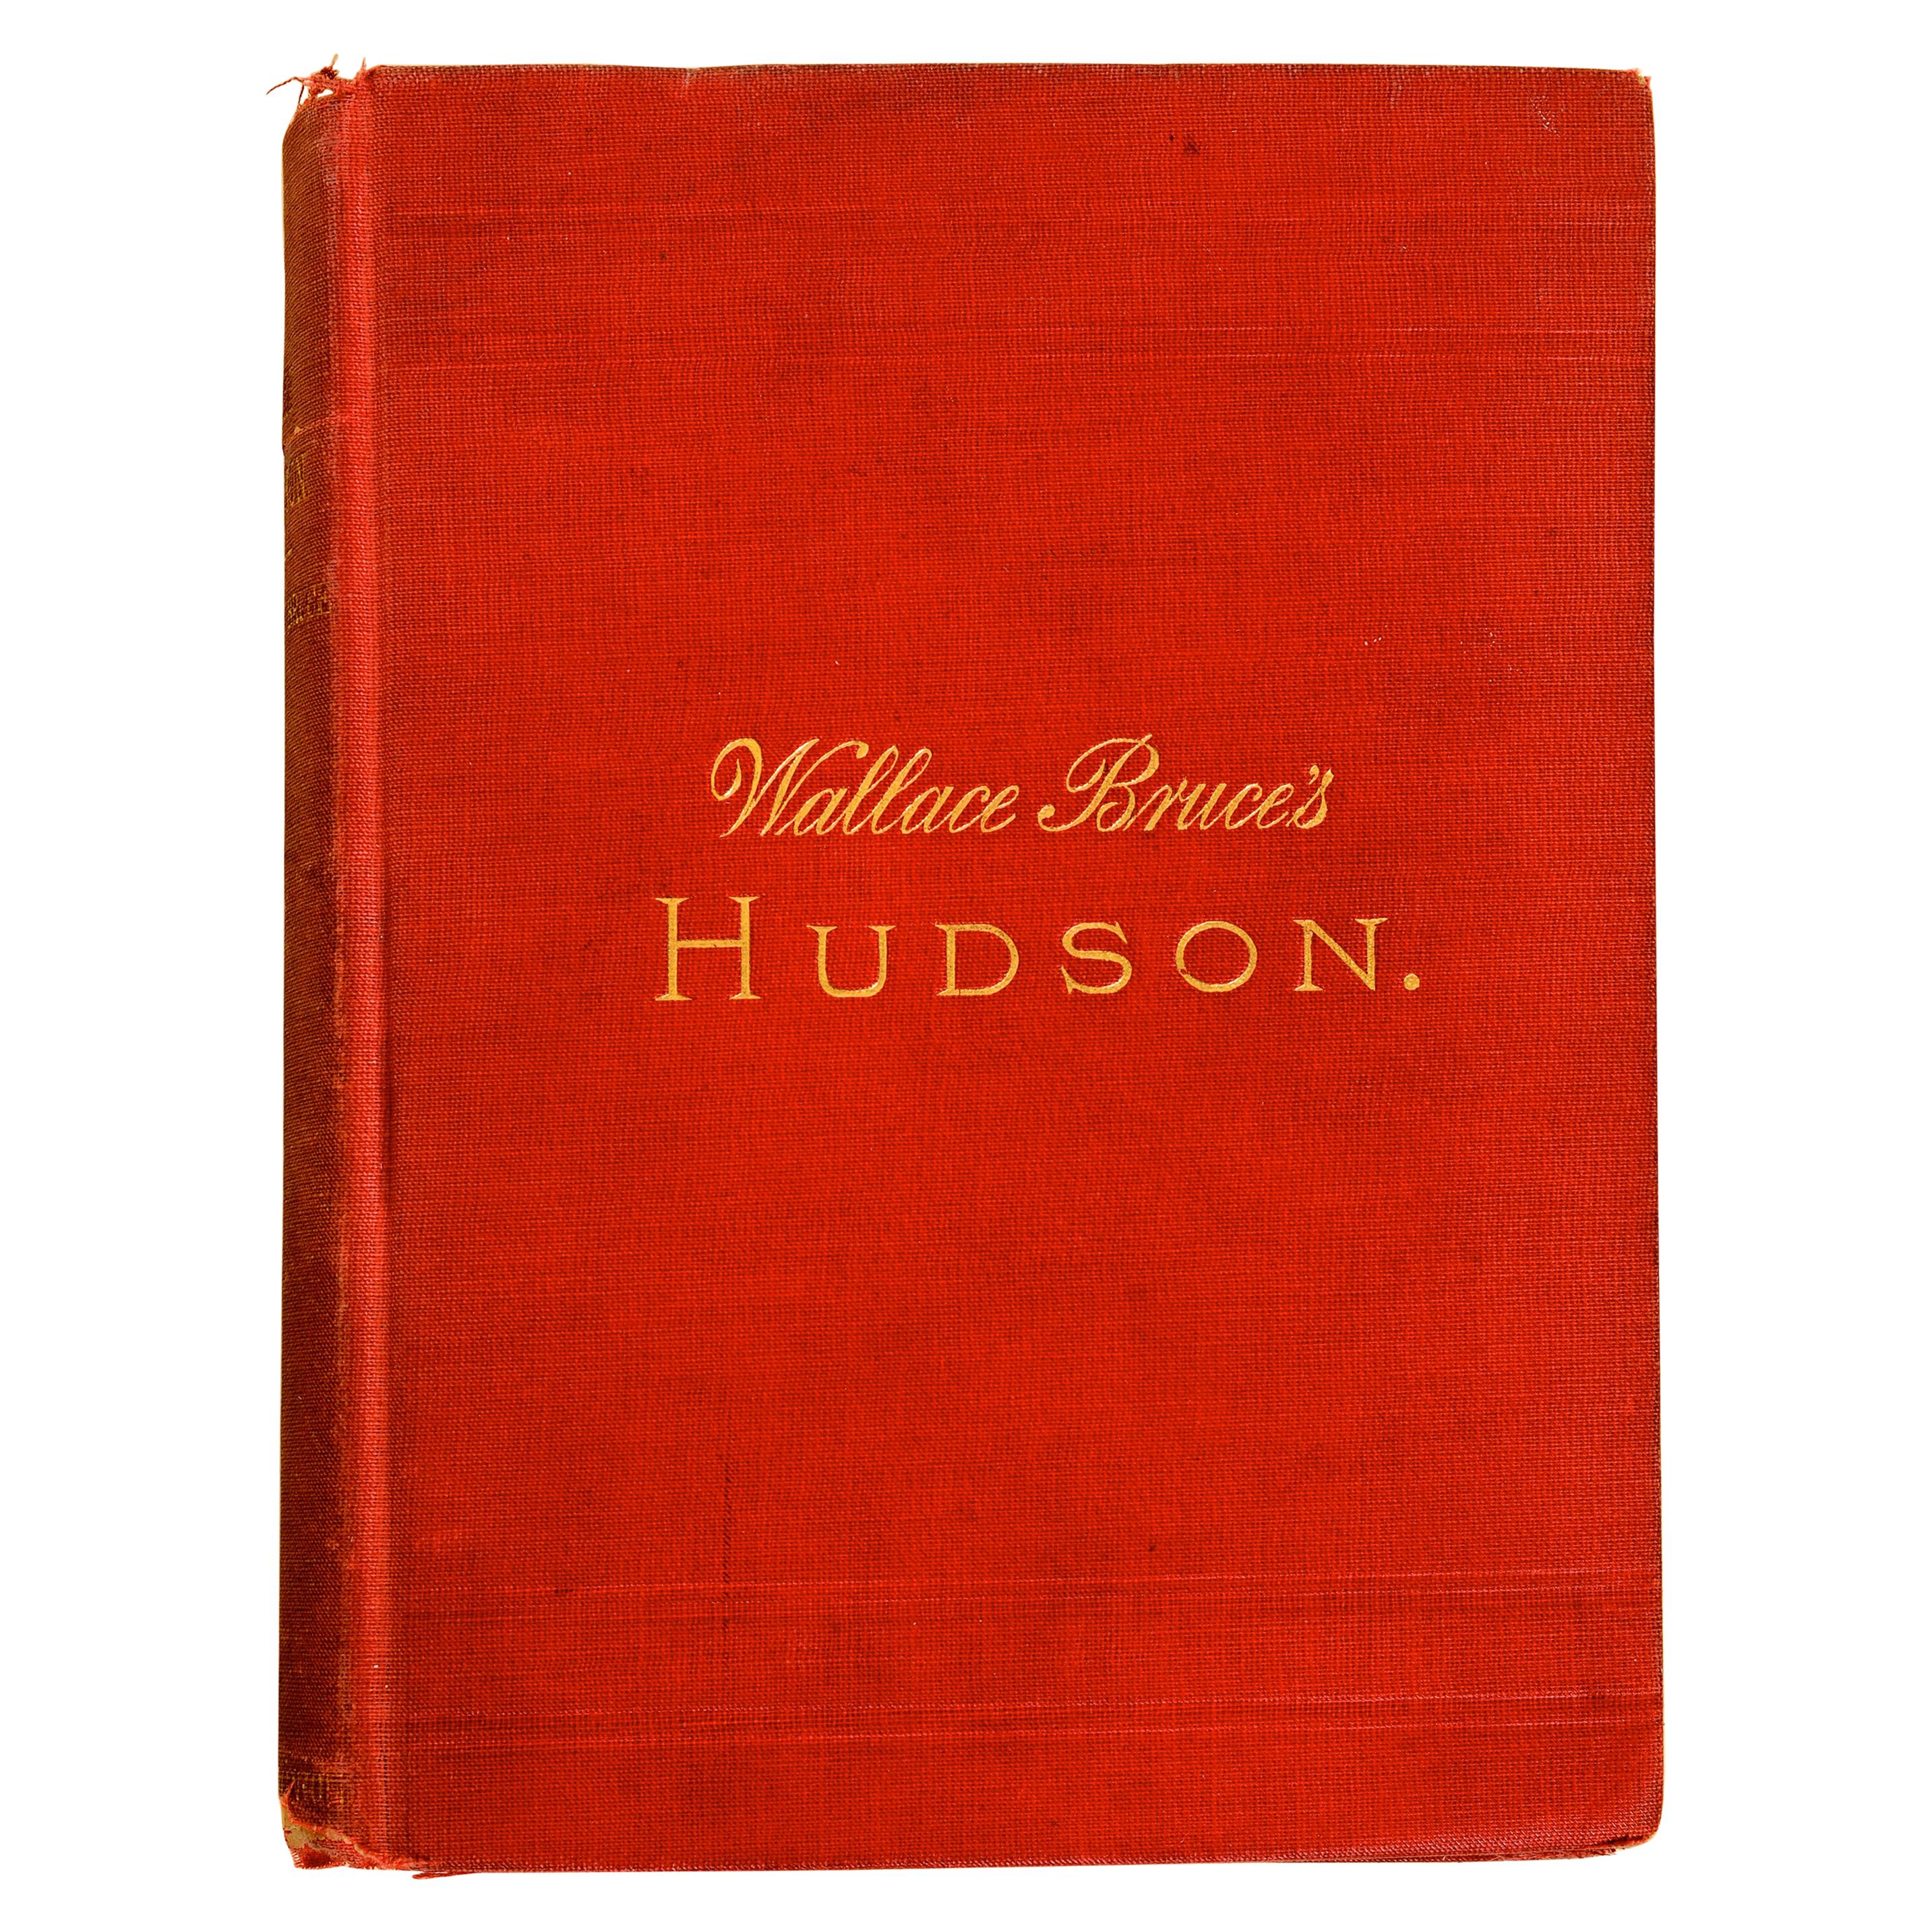 The Hudson, by Wallace Bruce, 1st Ed